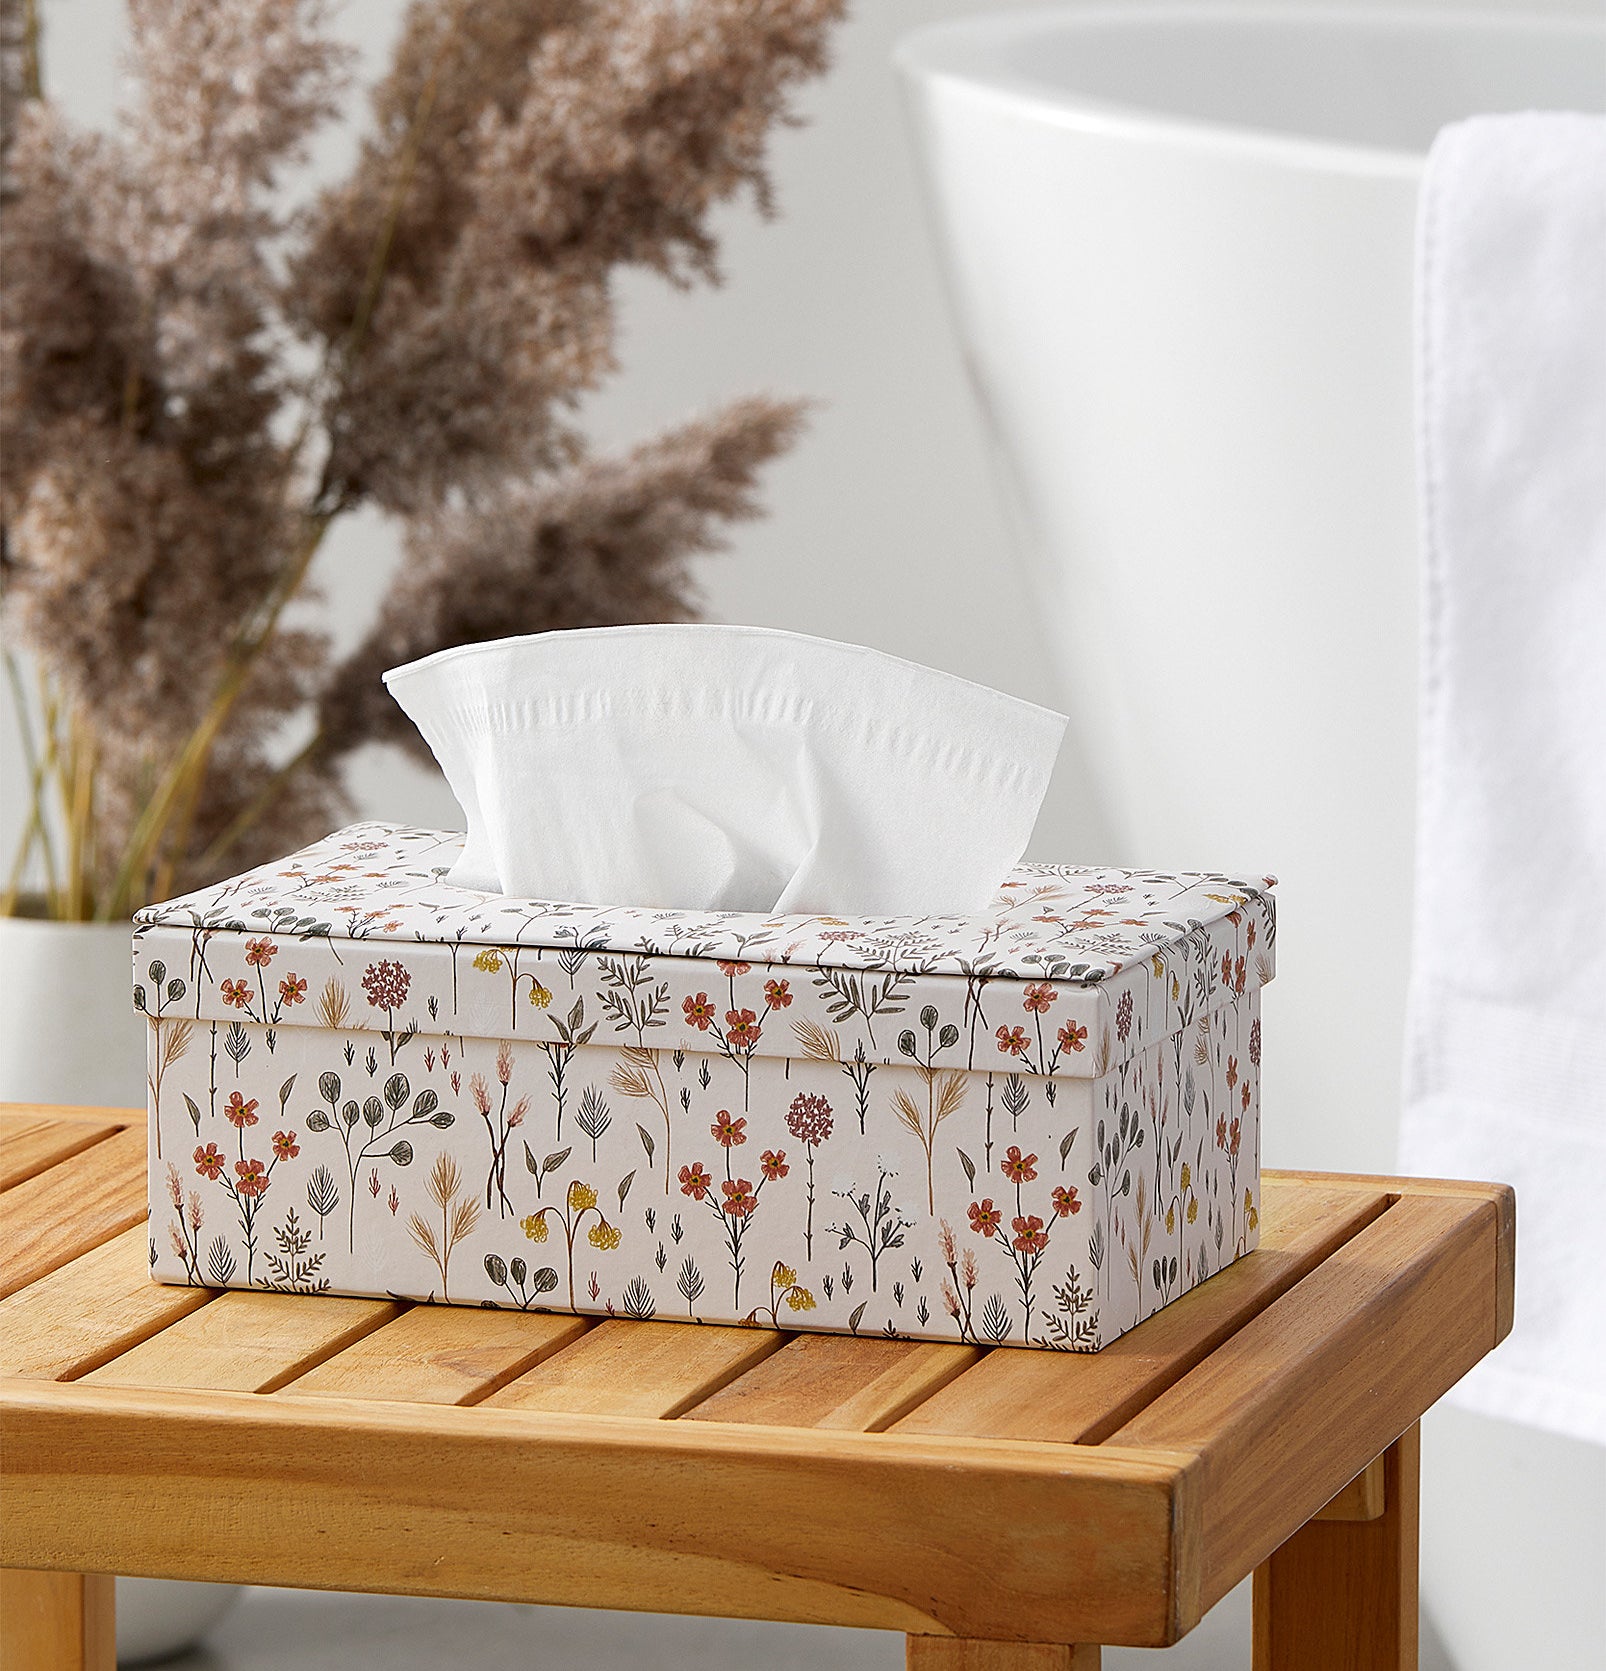 a floral tissue box holder on a wood surface